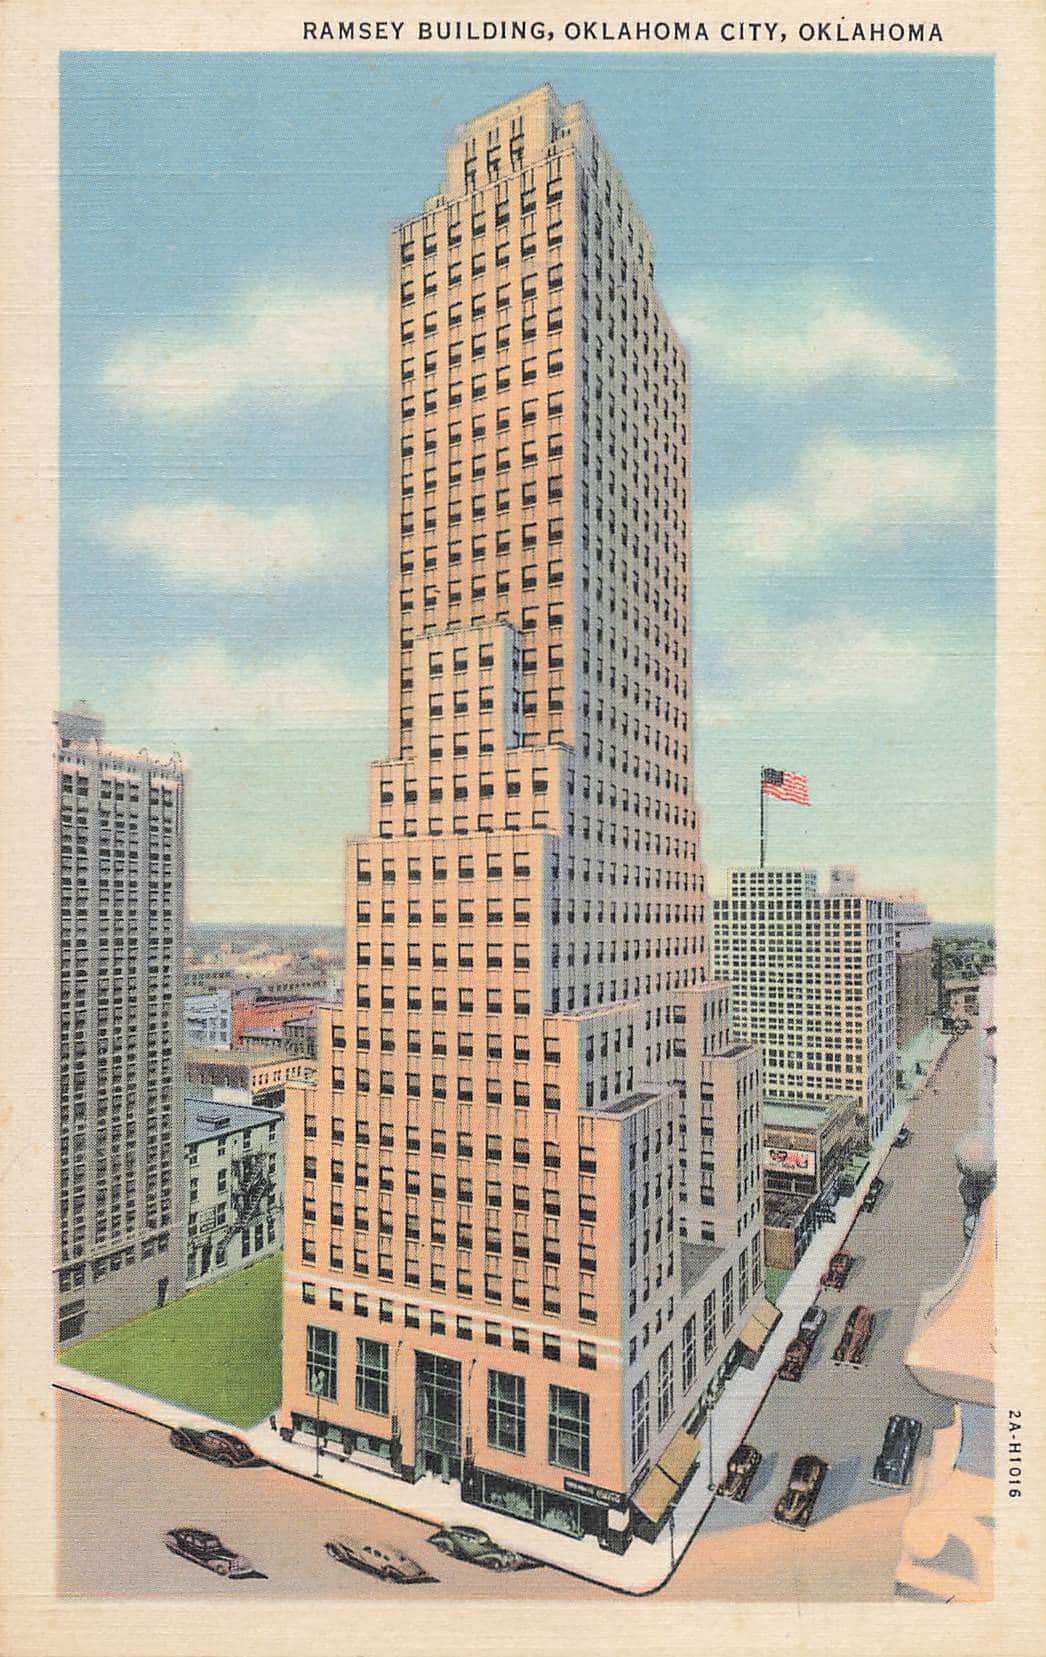 The Ramsey Building in downtown Oklahoma City as imagined in this 1931 postcard.